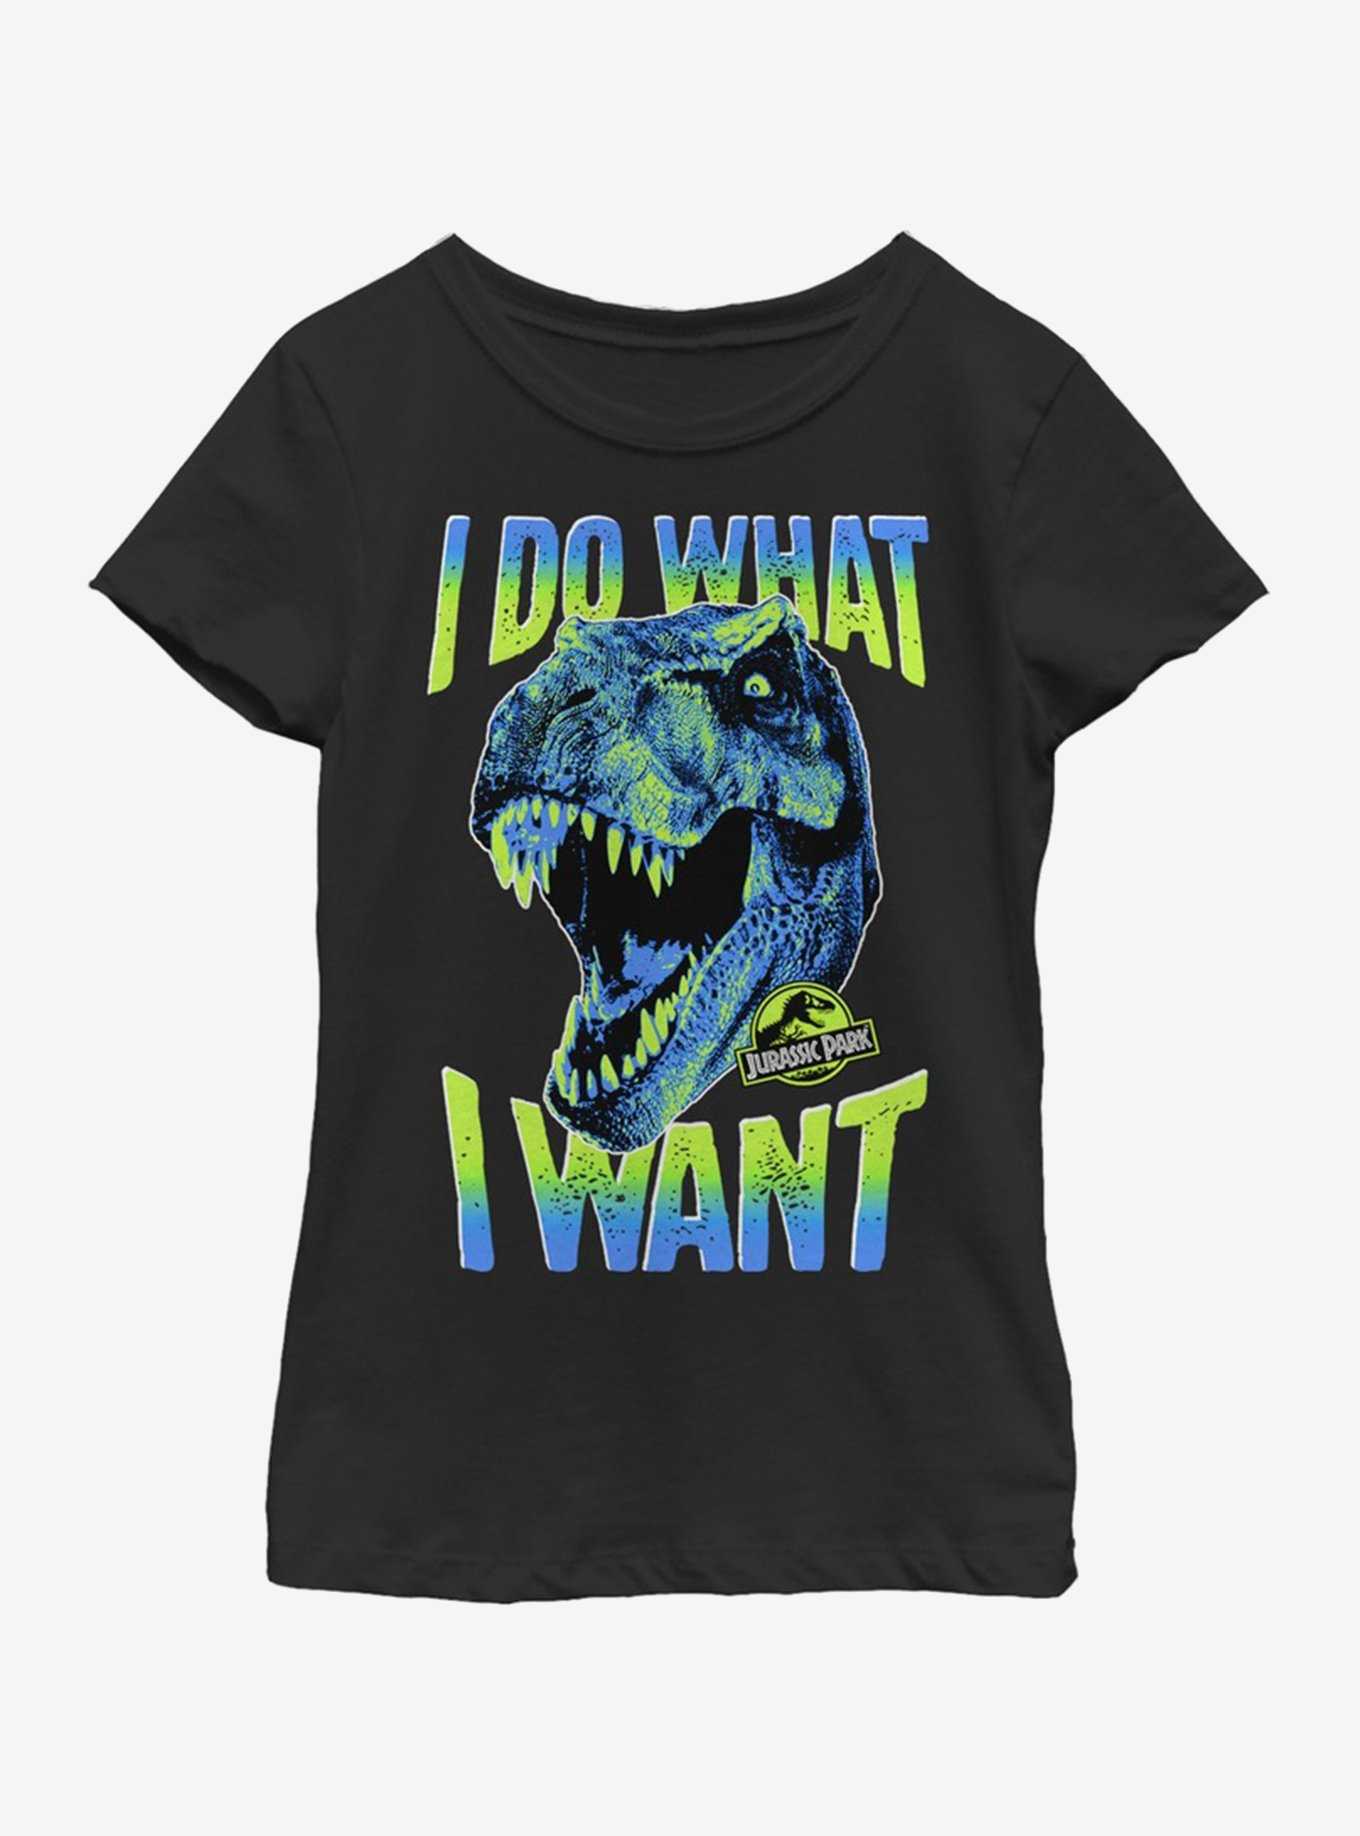 Jurassic Park What I Want Youth Girls T-Shirt, , hi-res